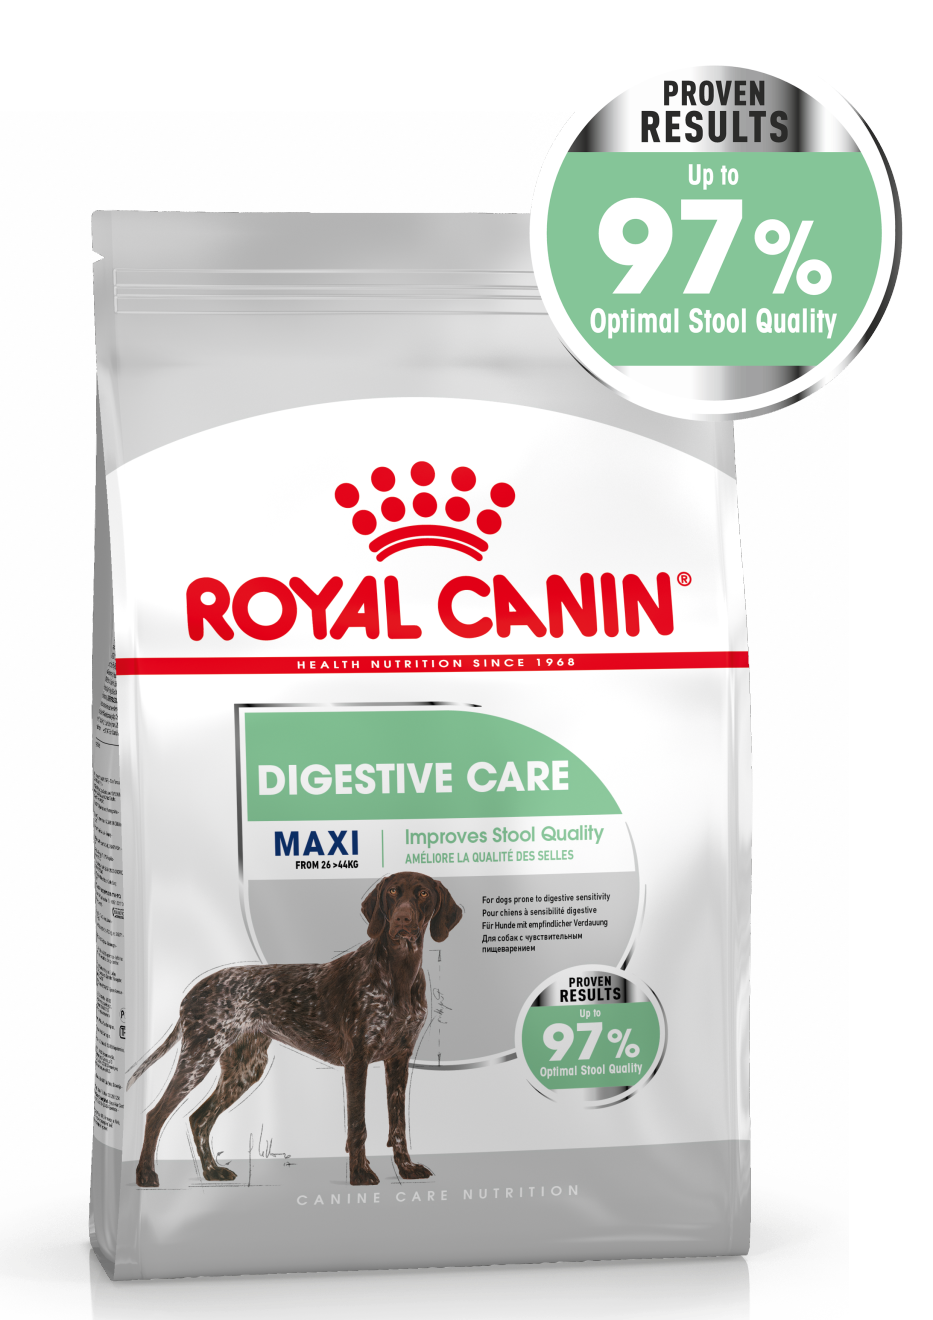 Packshot of Maxi Digestive Canine Care Nutrition